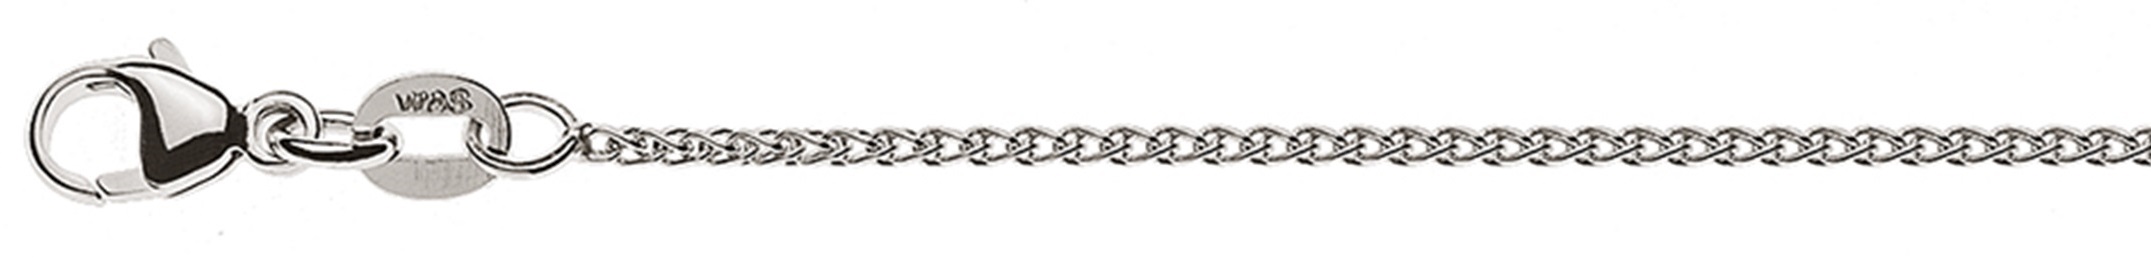 AURONOS Style Necklace white gold 9K cable chain 50cm 1.2mm